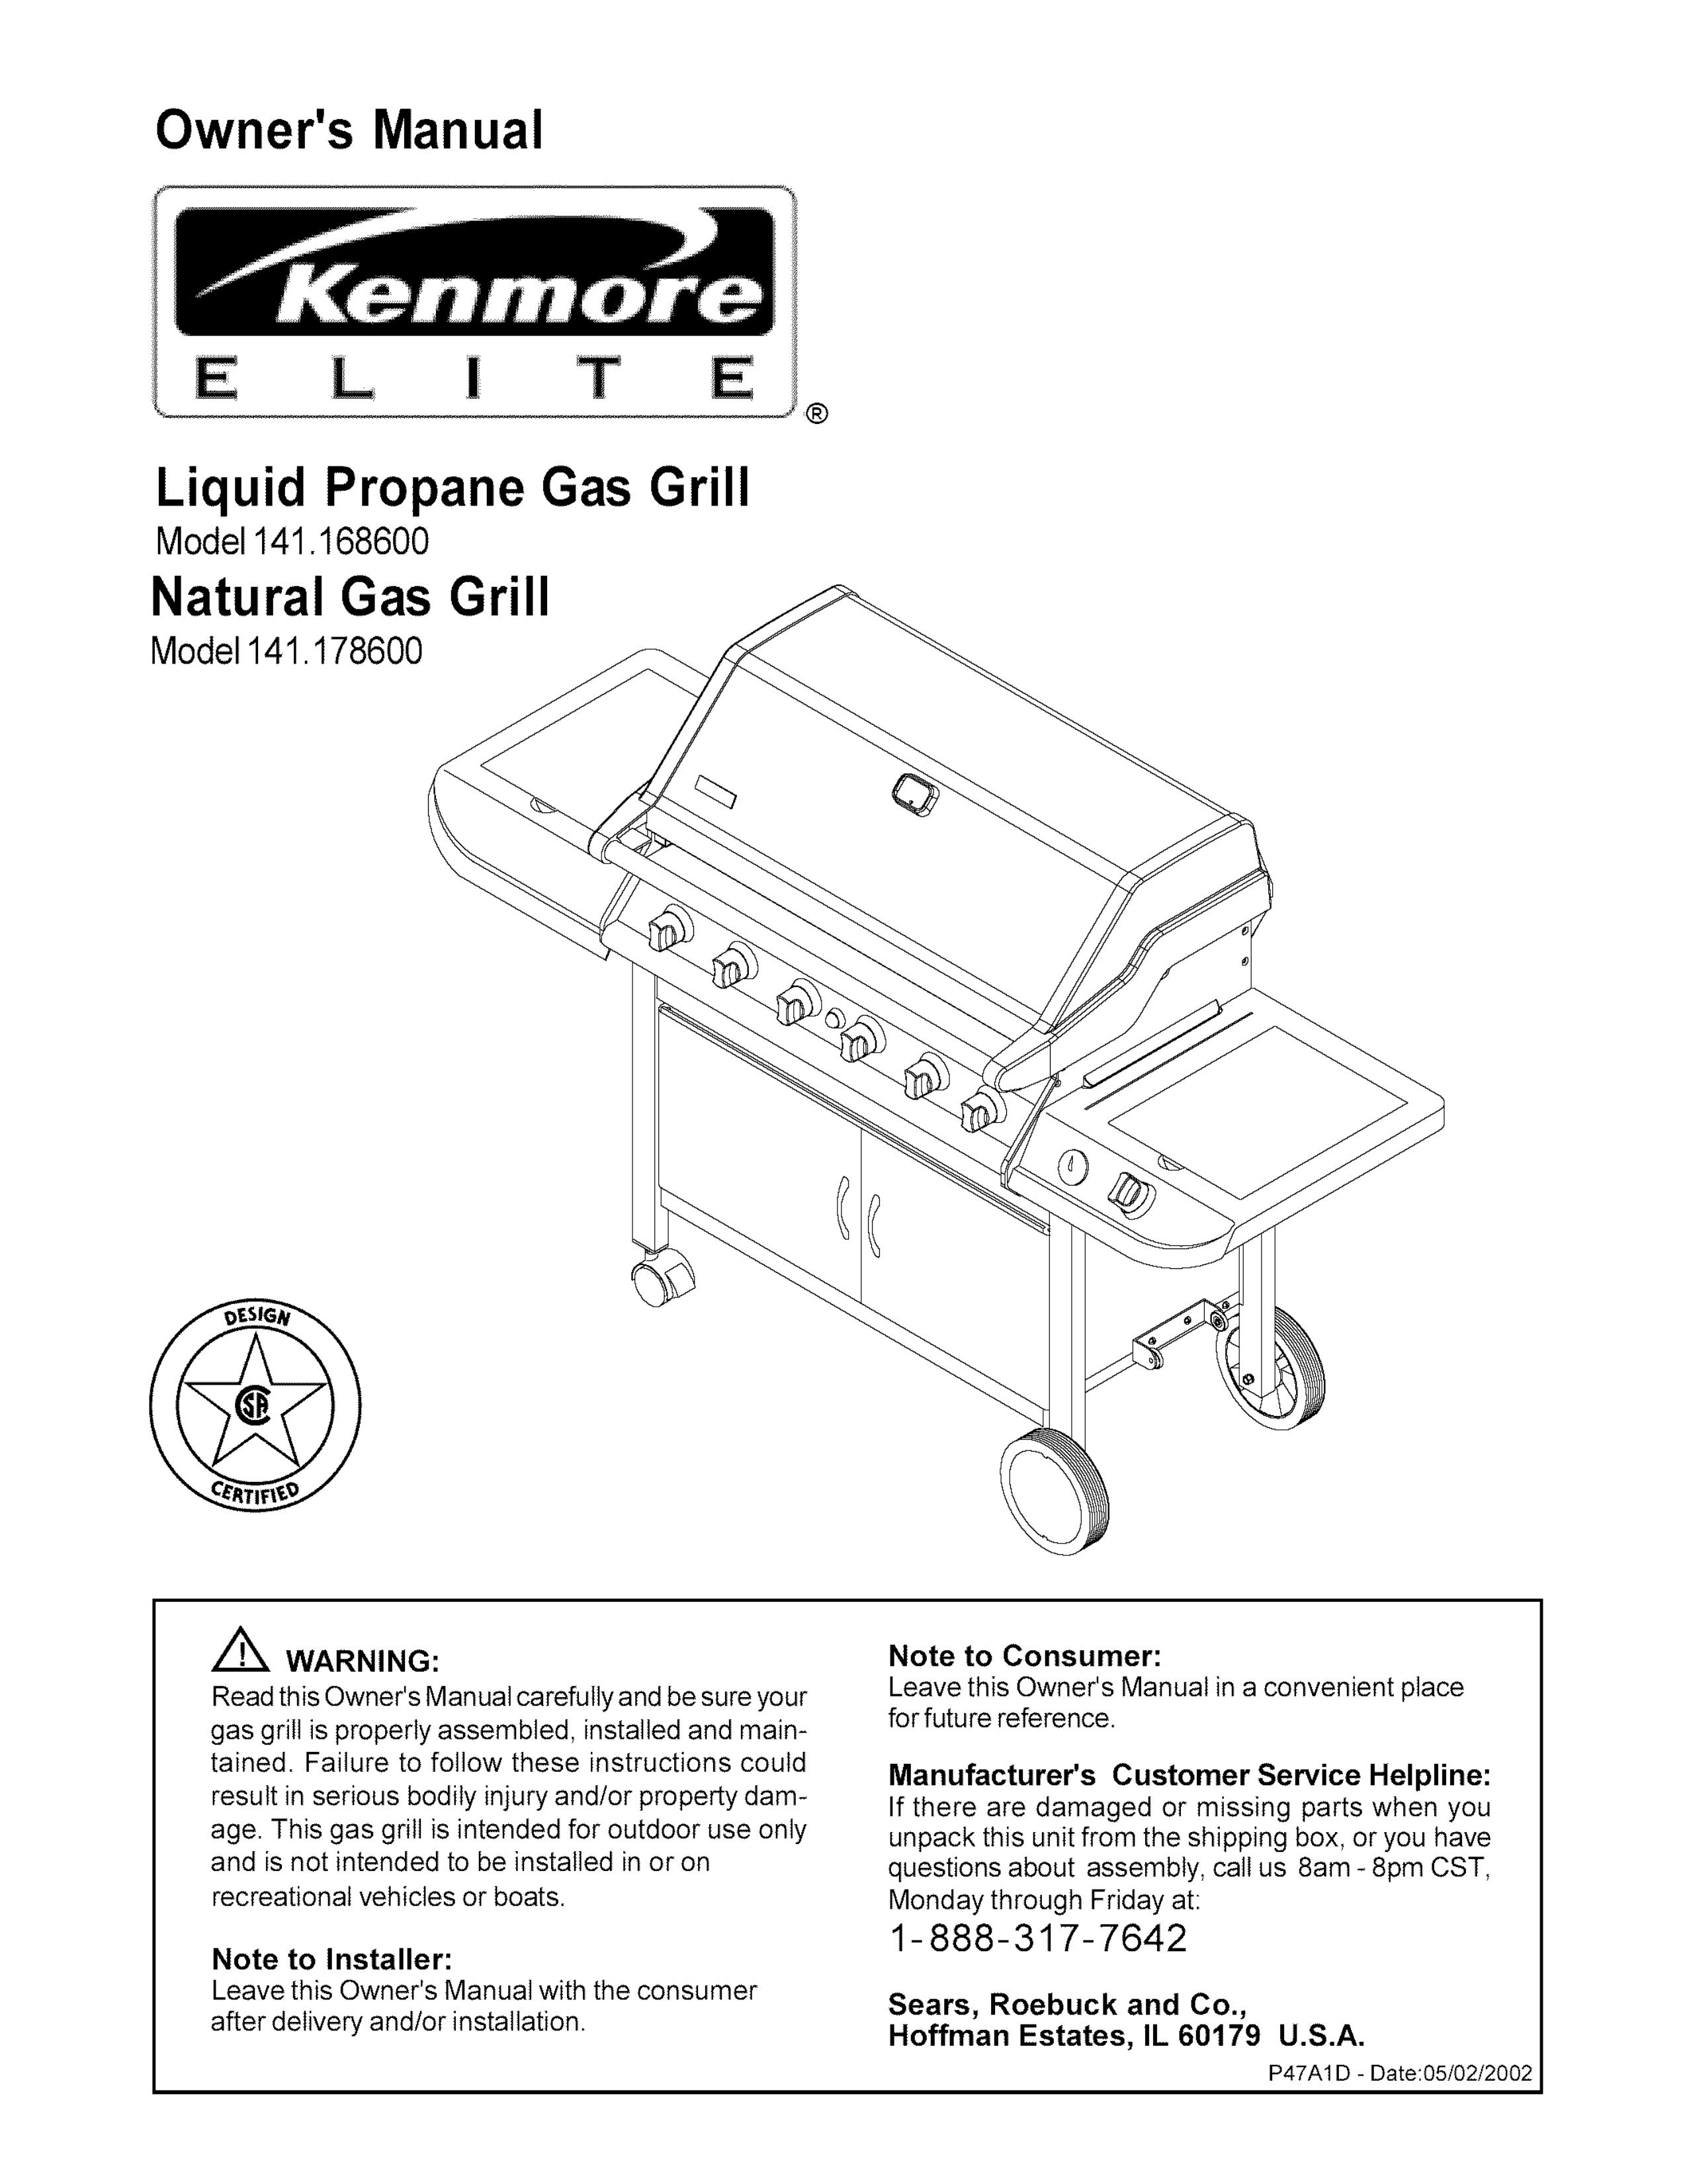 Kenmore 141.1686 Gas Grill User Manual